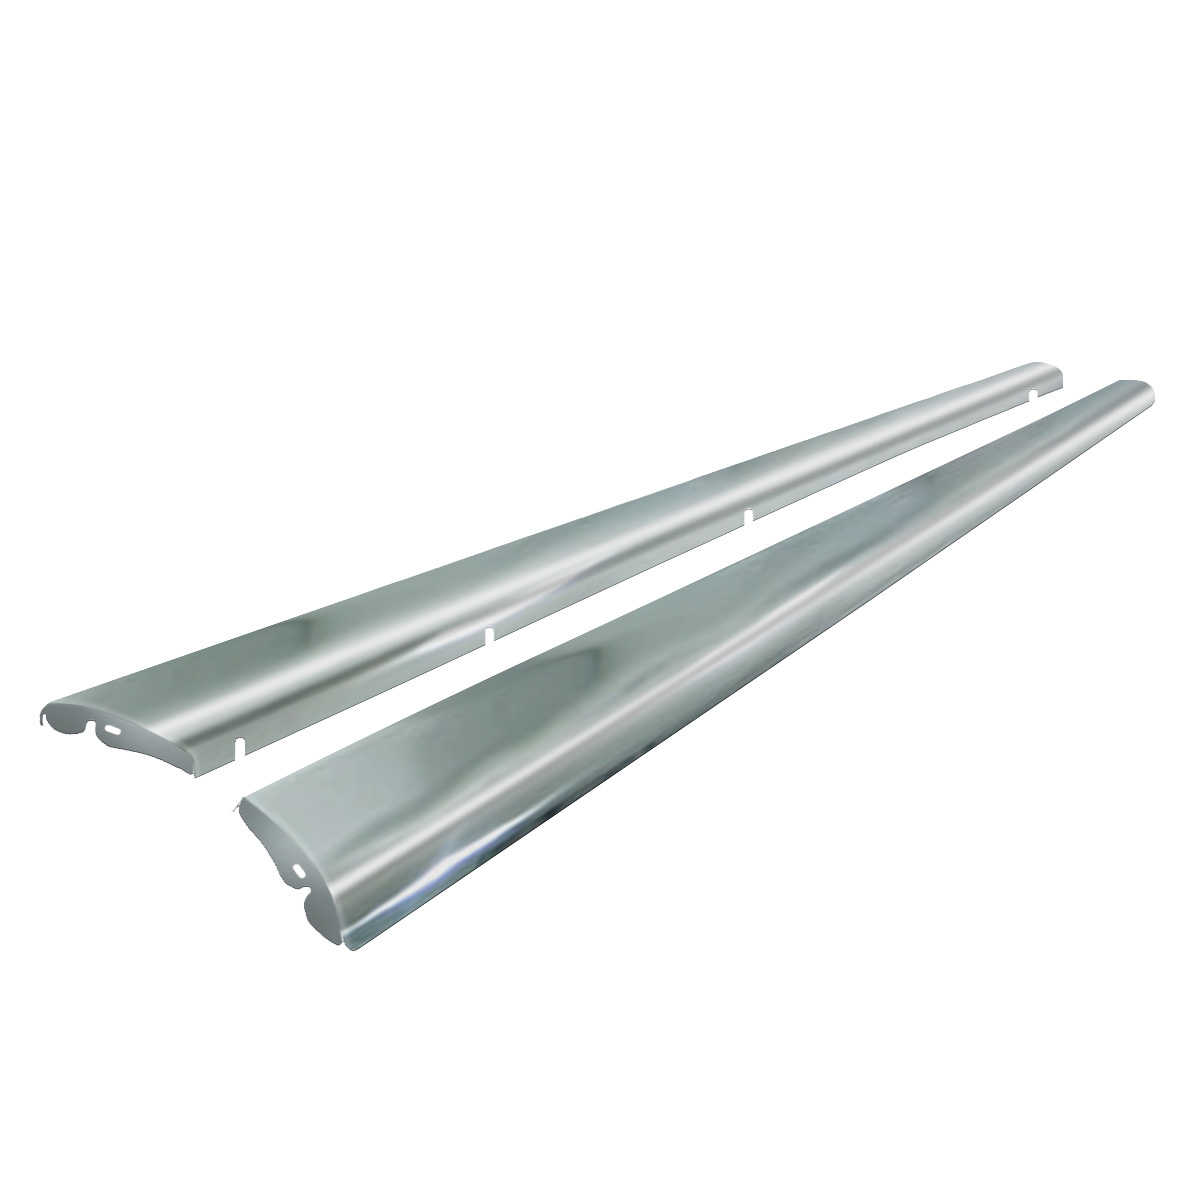 VW Running Boards - Stainless Steel - No Louvers - Pair